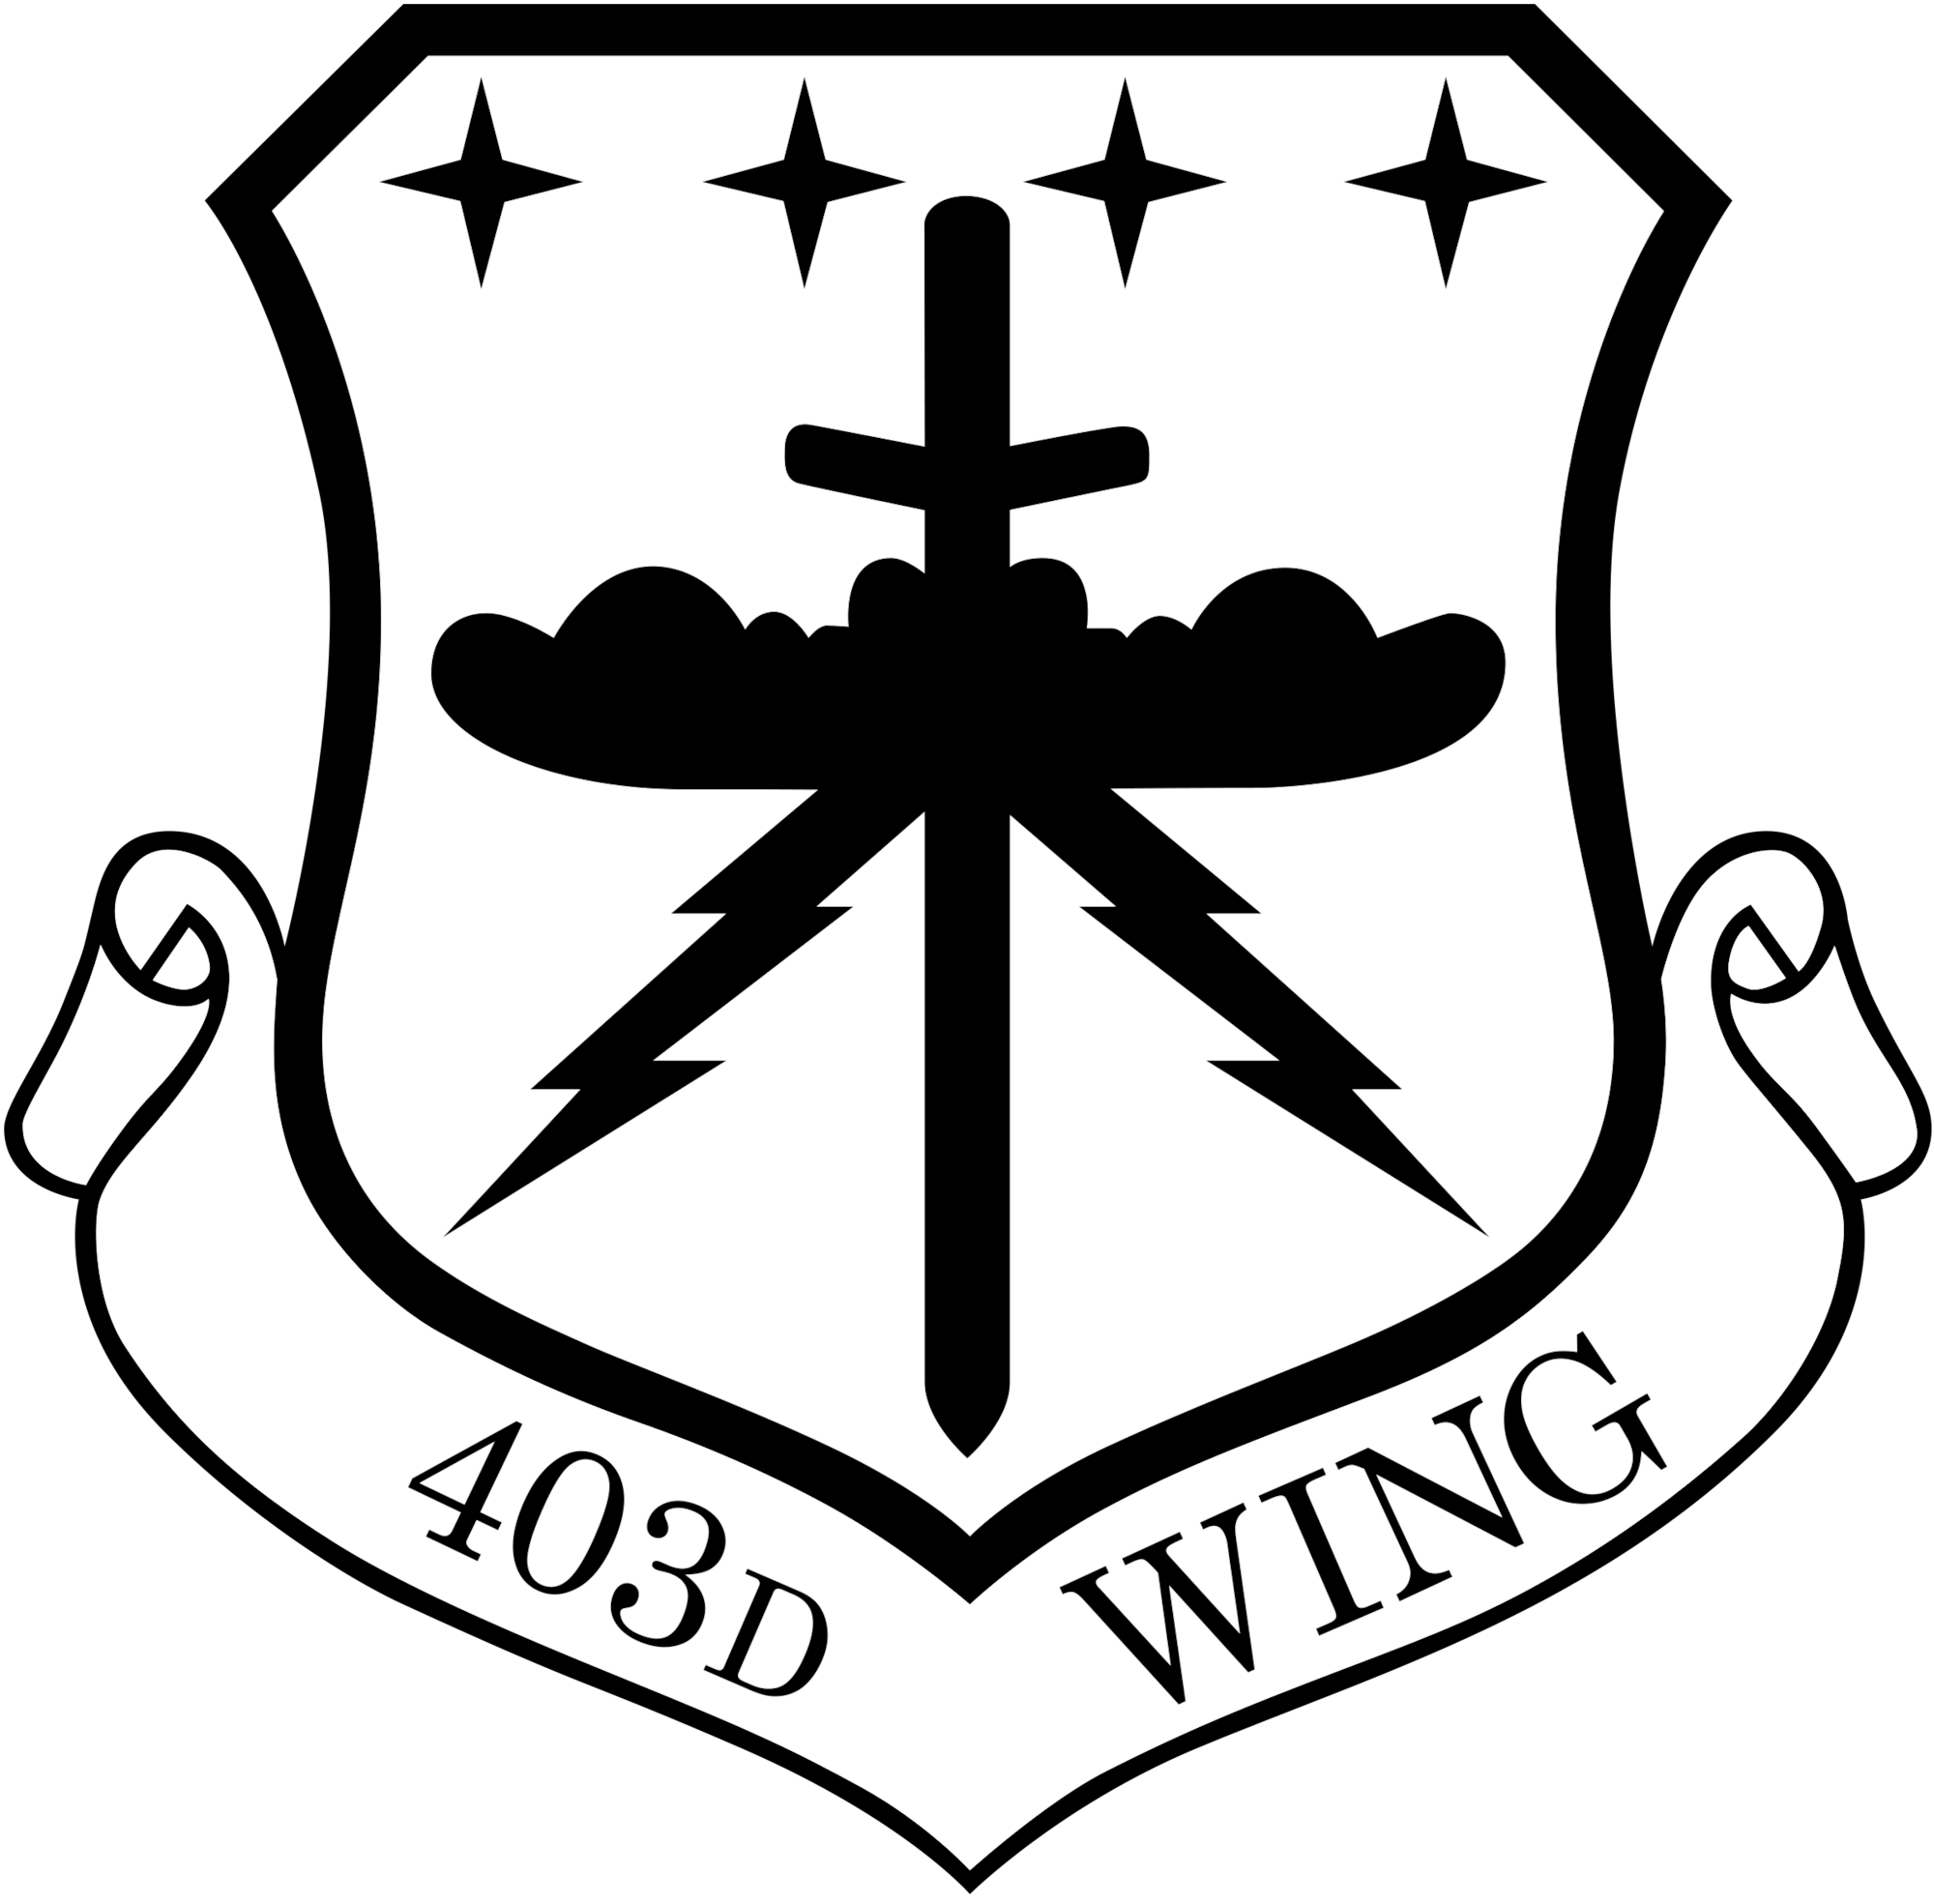 Shield of the 403rd Wing, Keesler Air Force Base, Miss. (U.S. Air Force illustration)